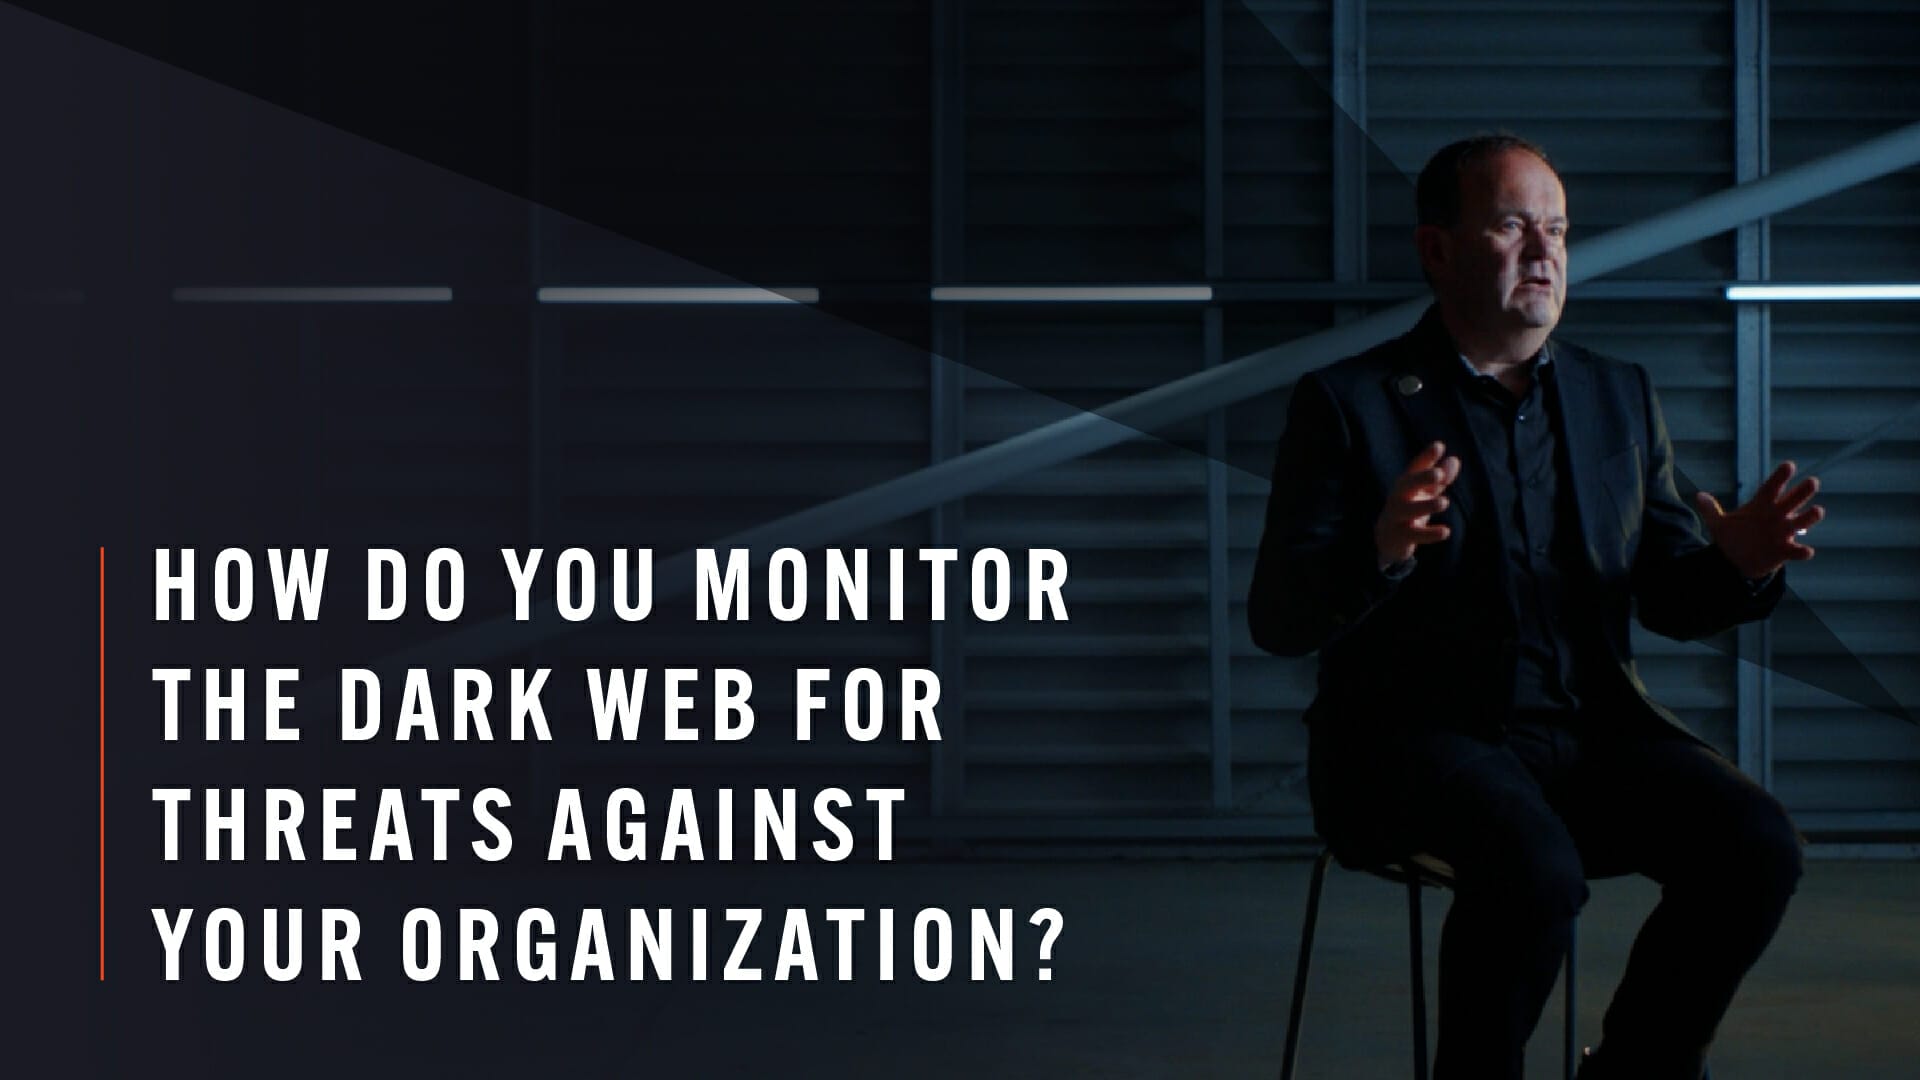 How do you monitor the dark web for threats against your organization?